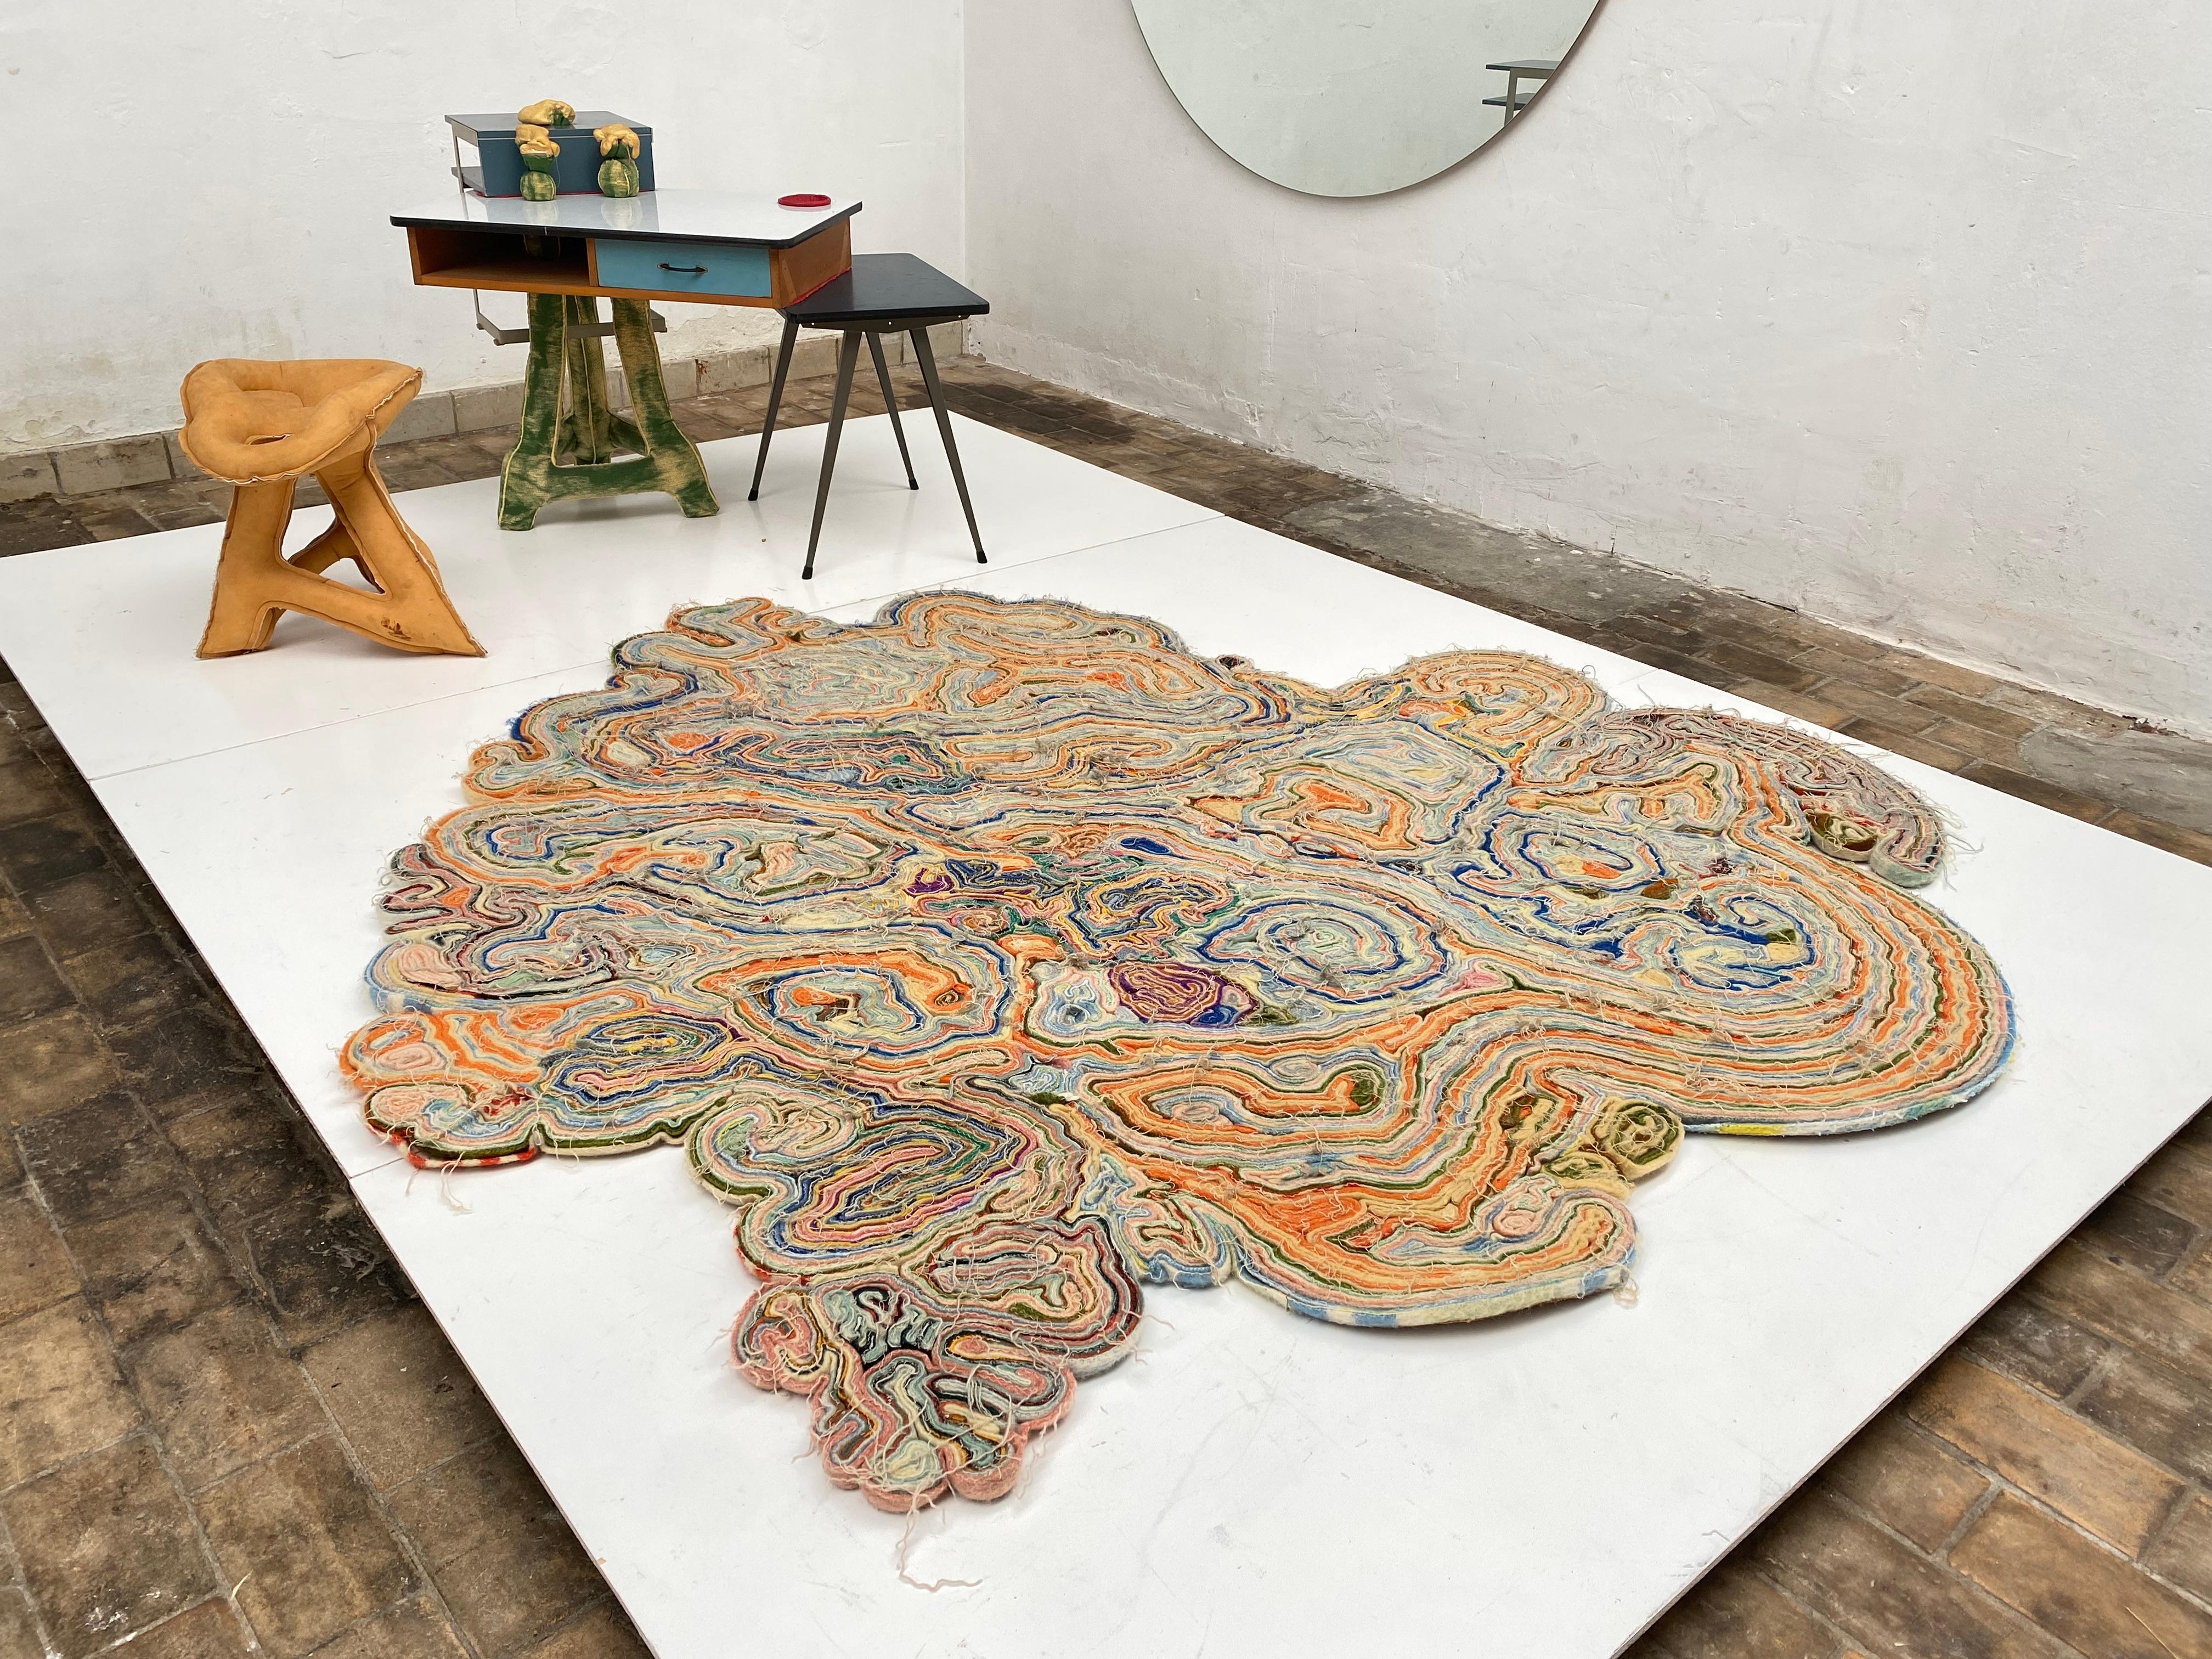 Hand-Crafted Unique First Prototype 'Accidental Carpet' by Tejo Remy & Rene Veenhuizen  For Sale